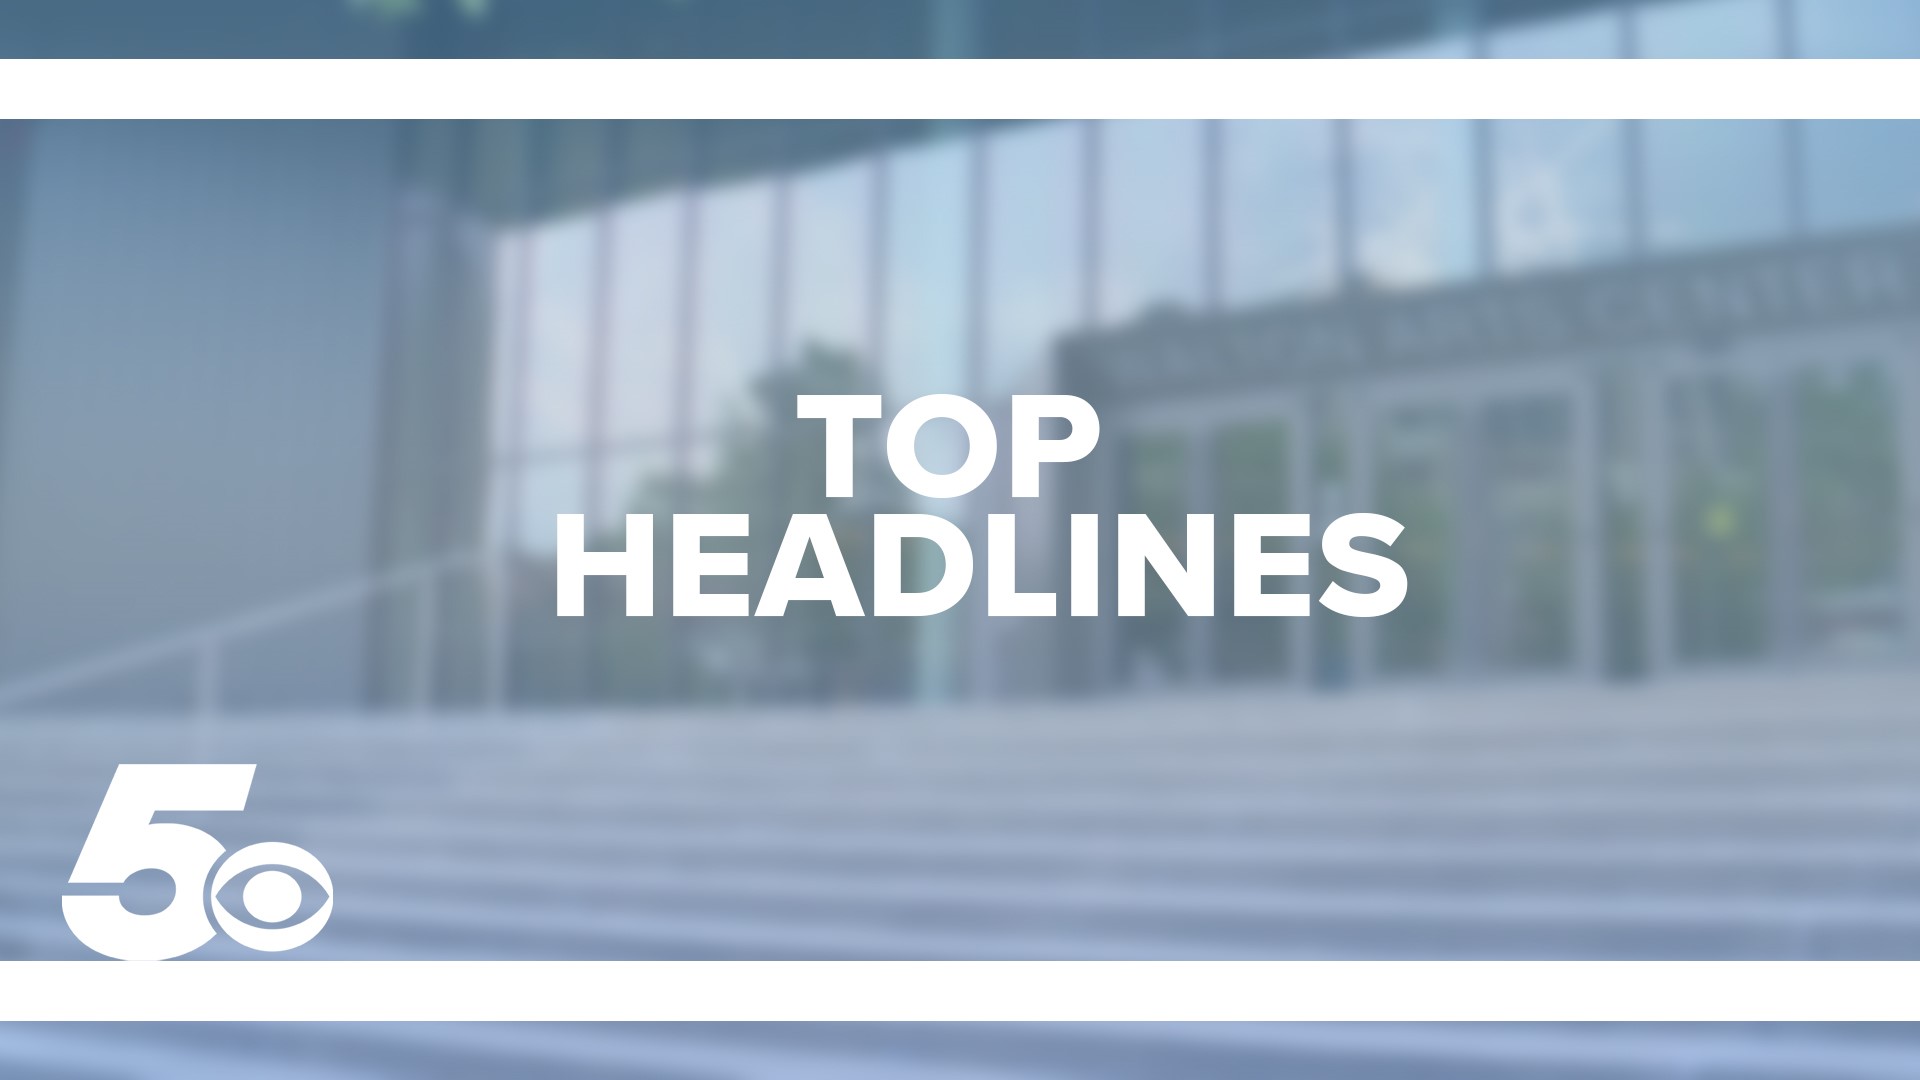 Take a look at today's top headlines for local news across Northwest Arkansas and the River Valley!